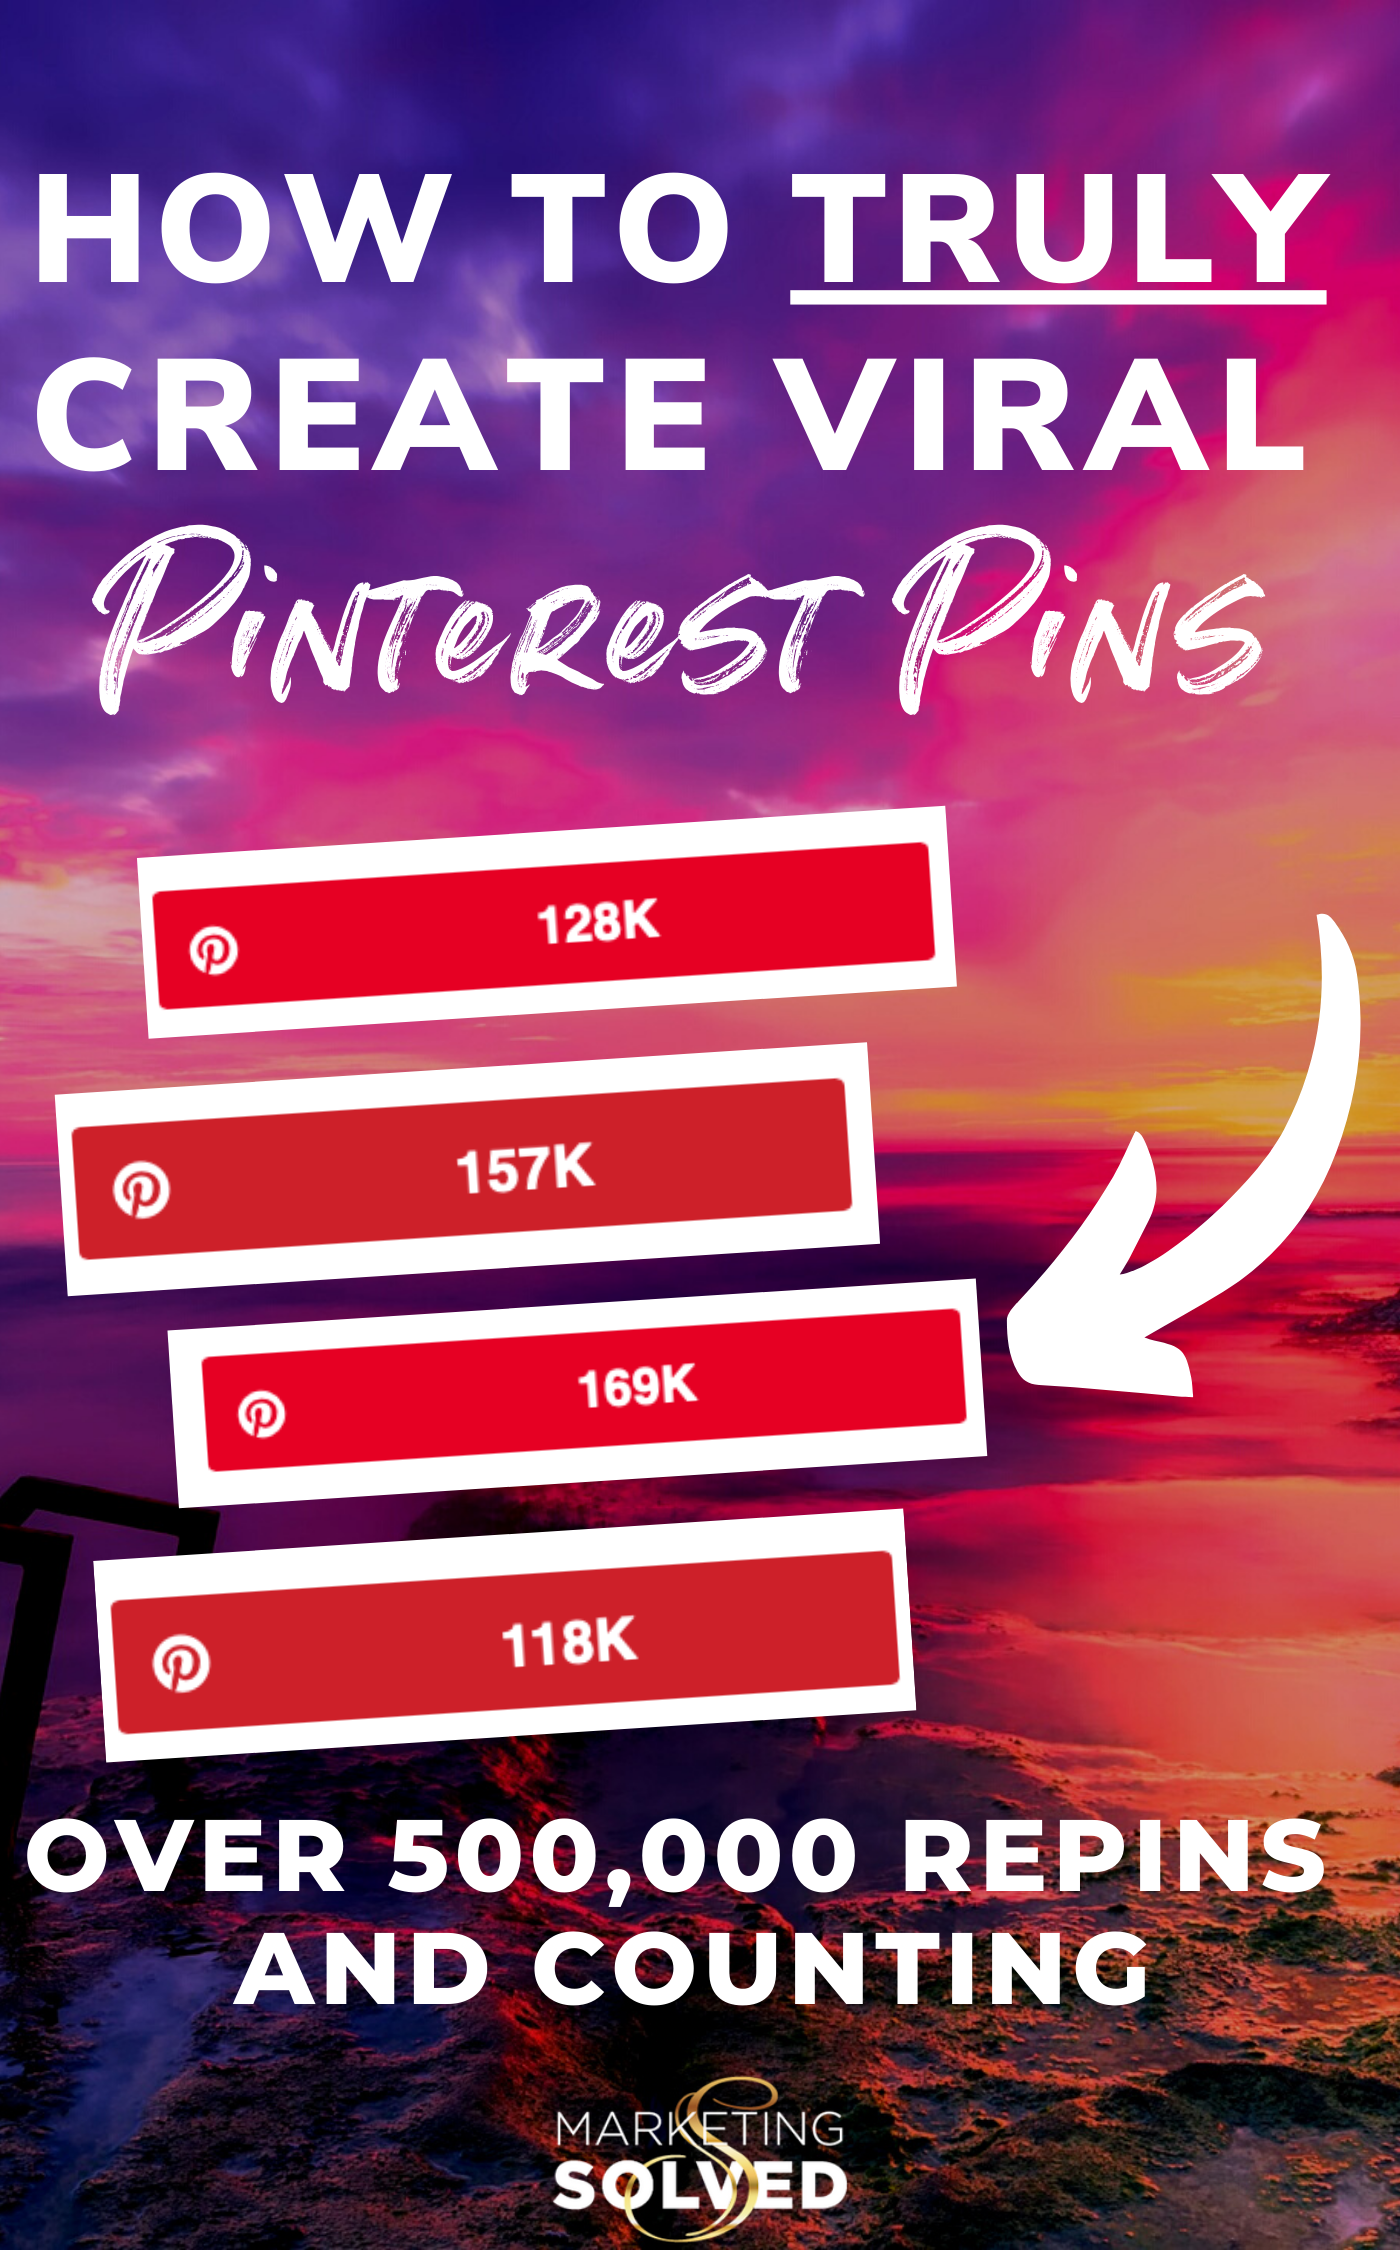 How to Create Viral Pins on Pinterest #pinterestmarketing #pinteresttips #pinterestmarketingstrategies #socialmedia #marketing #marketingstrategies #pinterestforbusiness #pinterestforbeginners